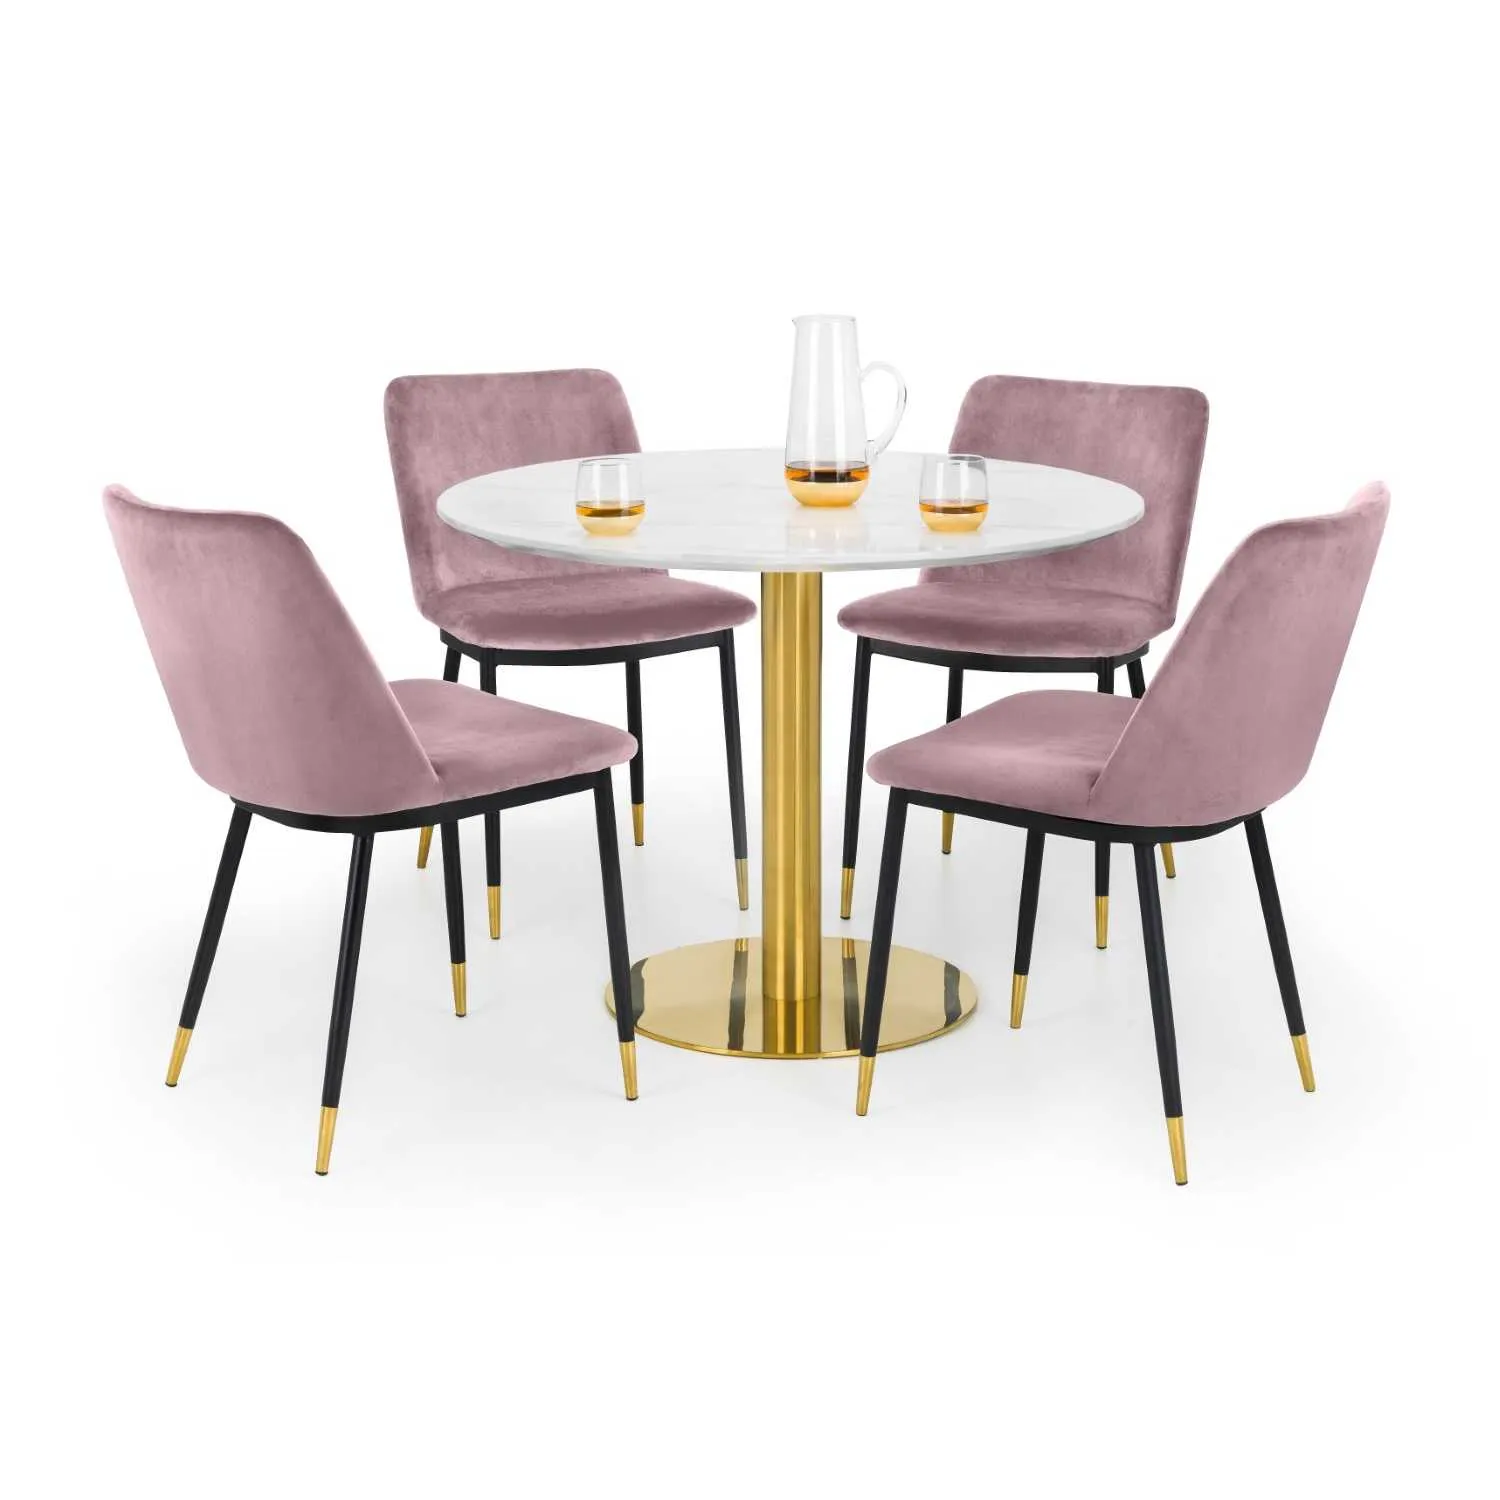 Delaunay Dining Chair Dusky Pink